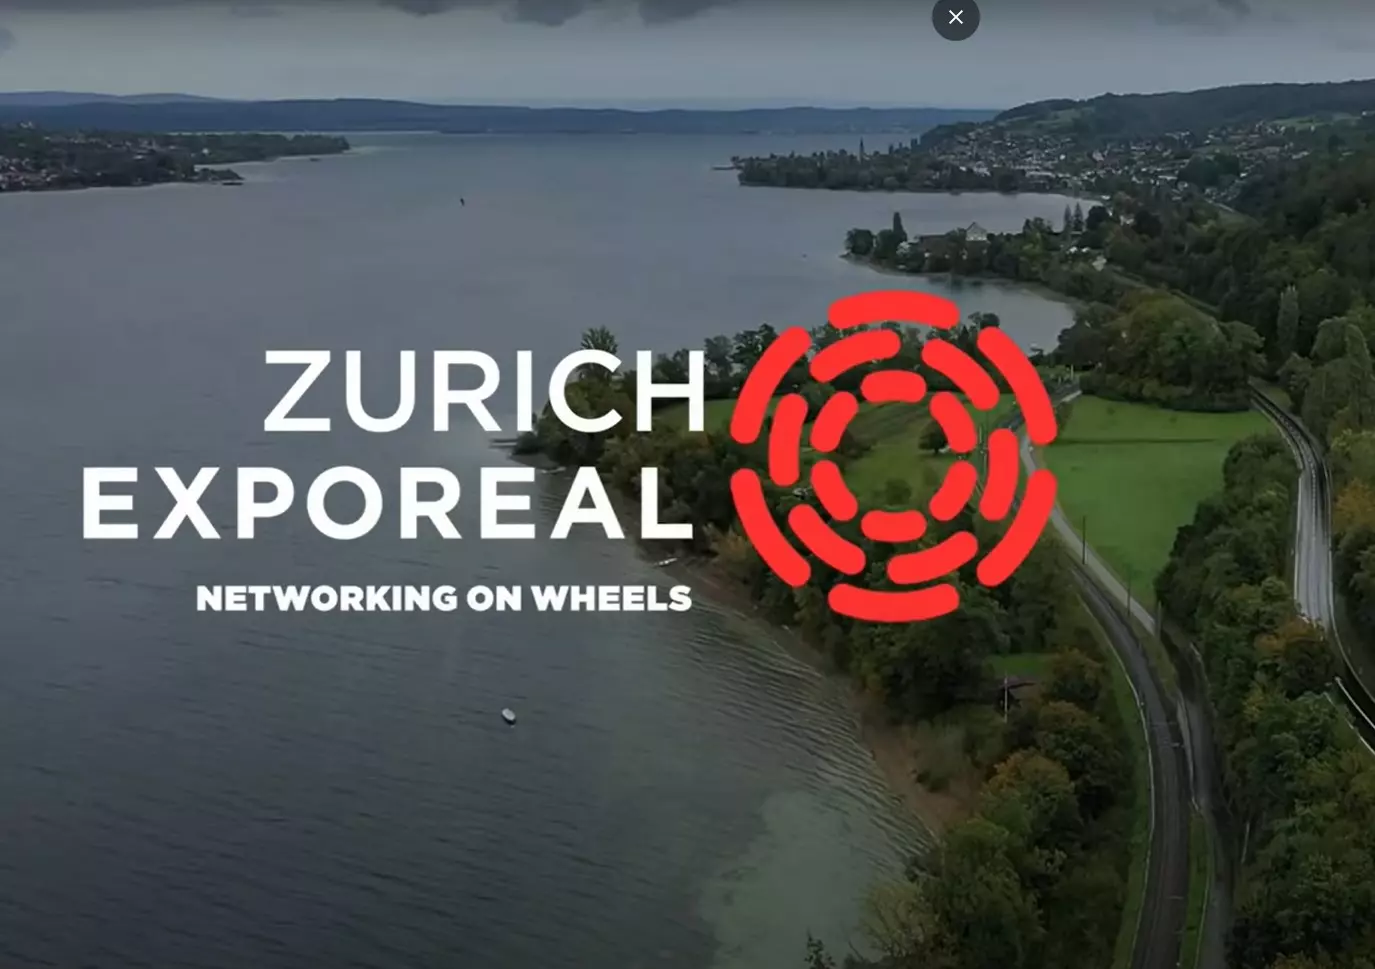 Zurich expo real